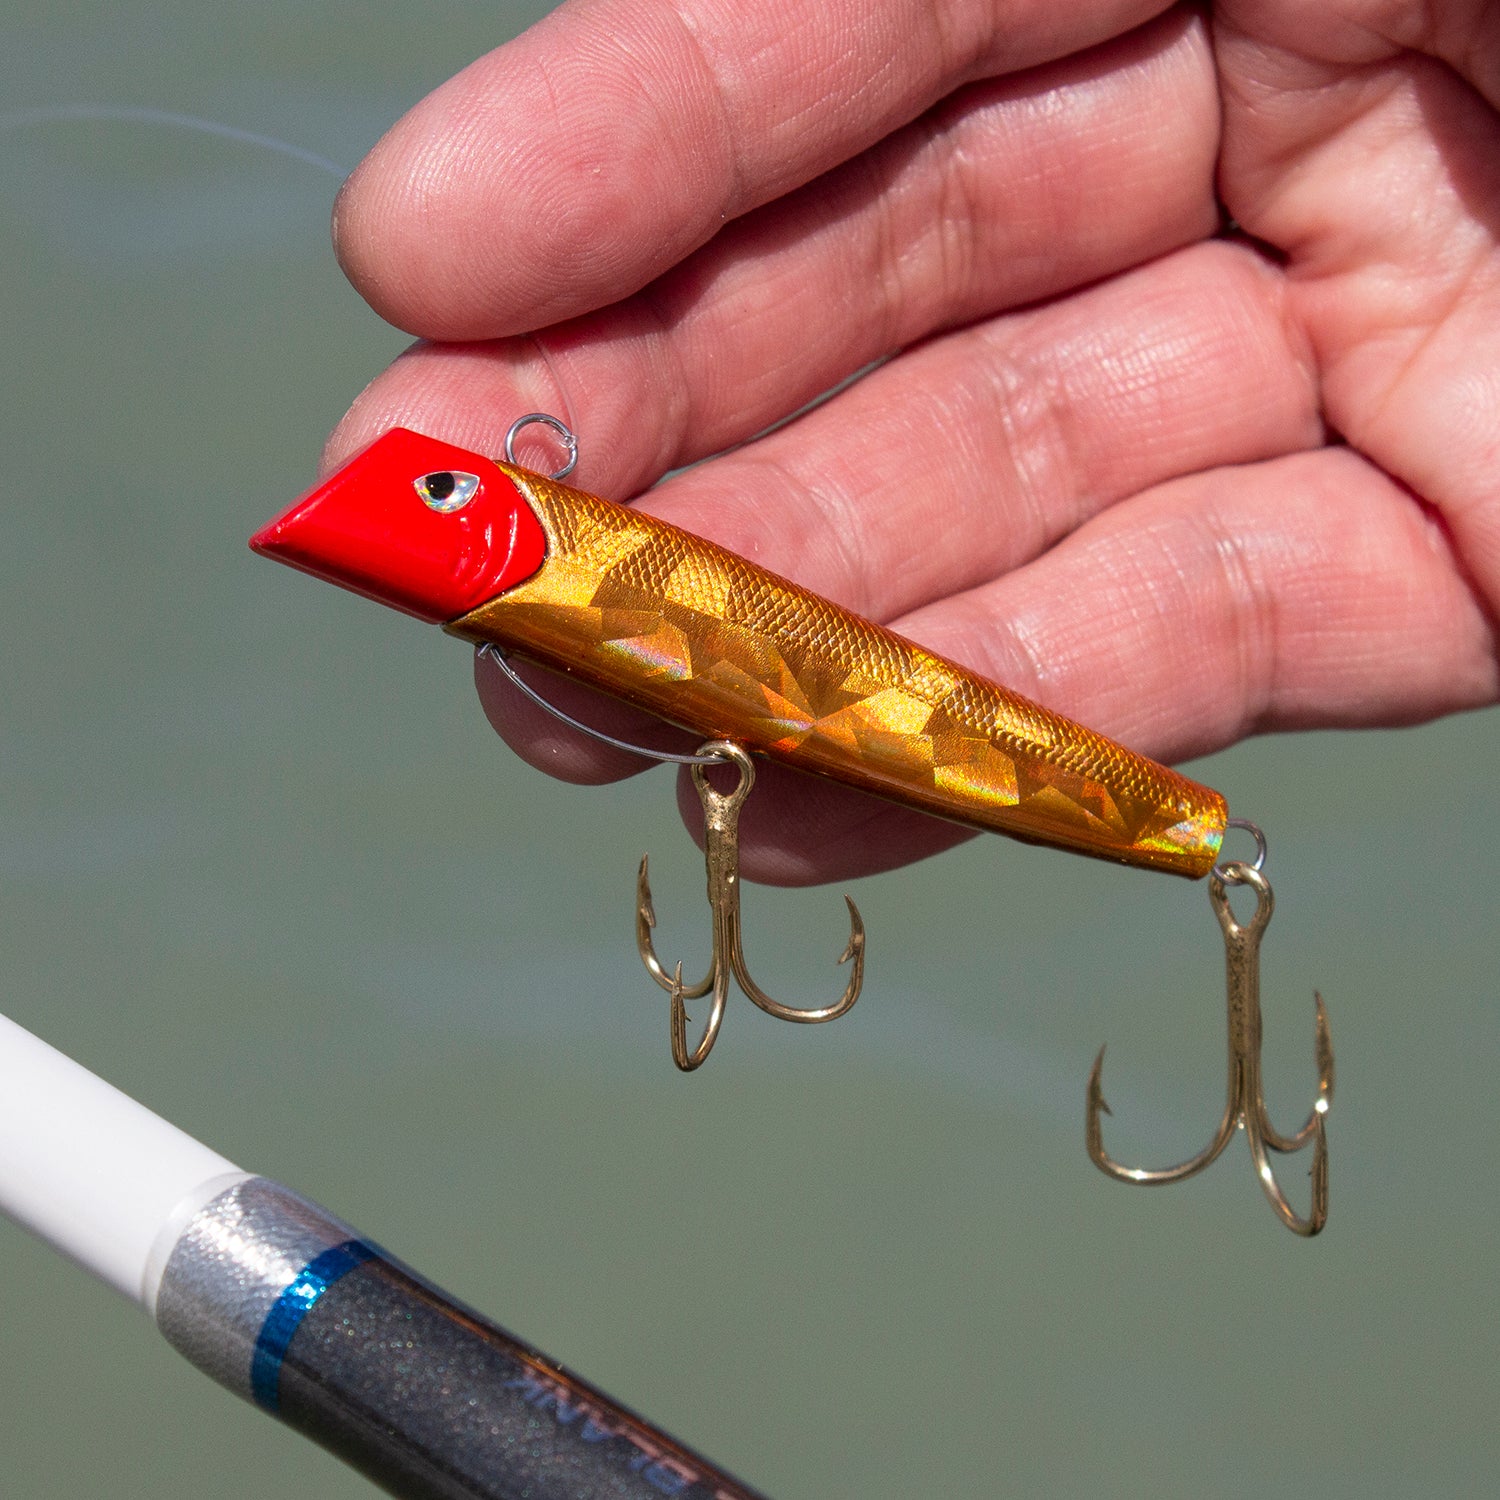 About Got-cha Fishing Lures